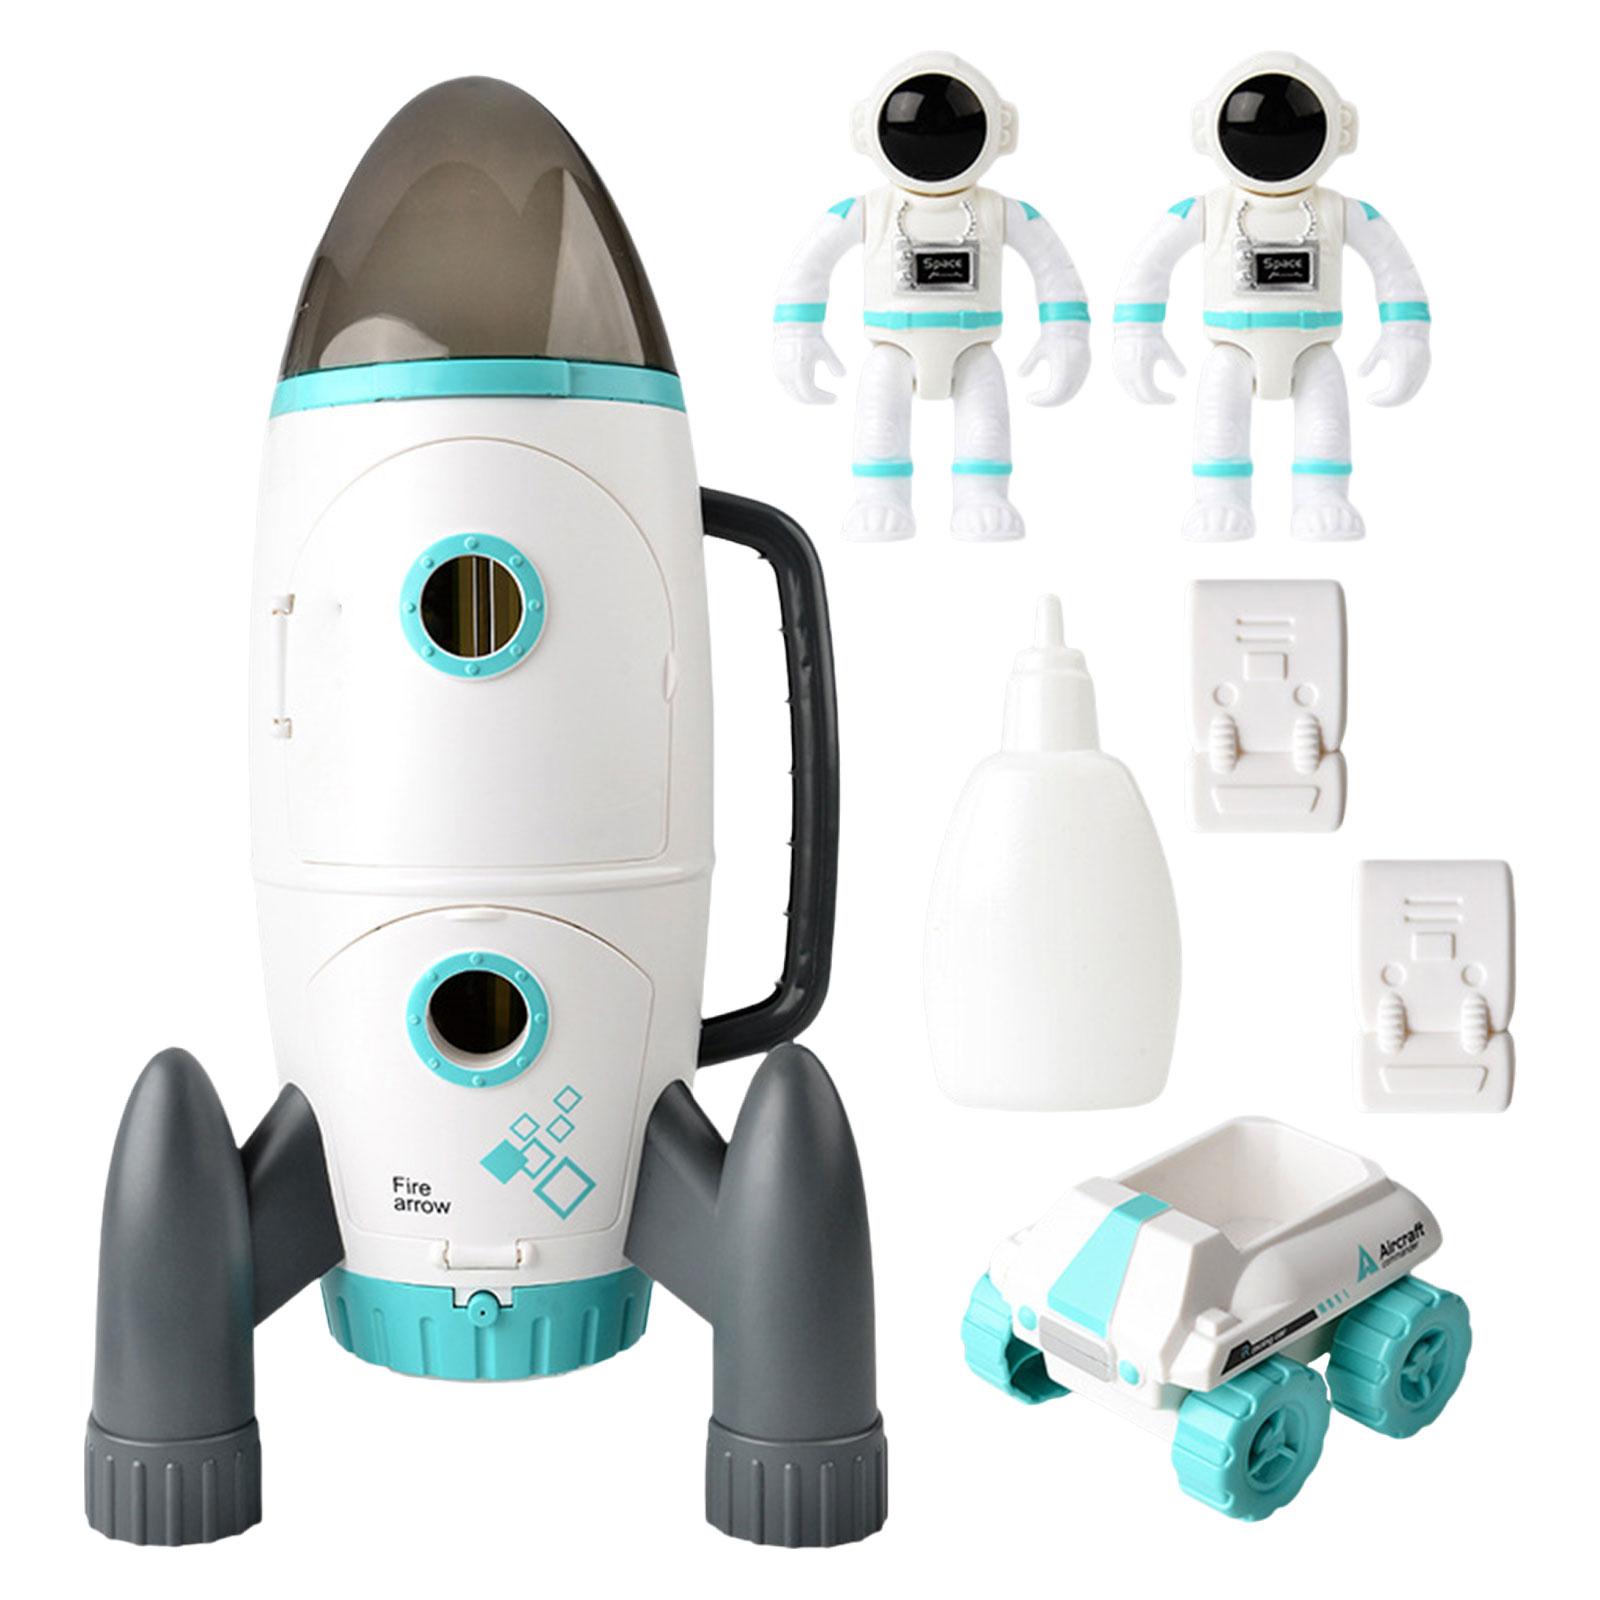 Space Shuttle Mission rocket toys, Space Shuttle Toy, Mechanical Arm Sounds  Playsets Astronauts Space Shuttle with Lights Sounds, Boys Girls Rocket  black Walmart Canada